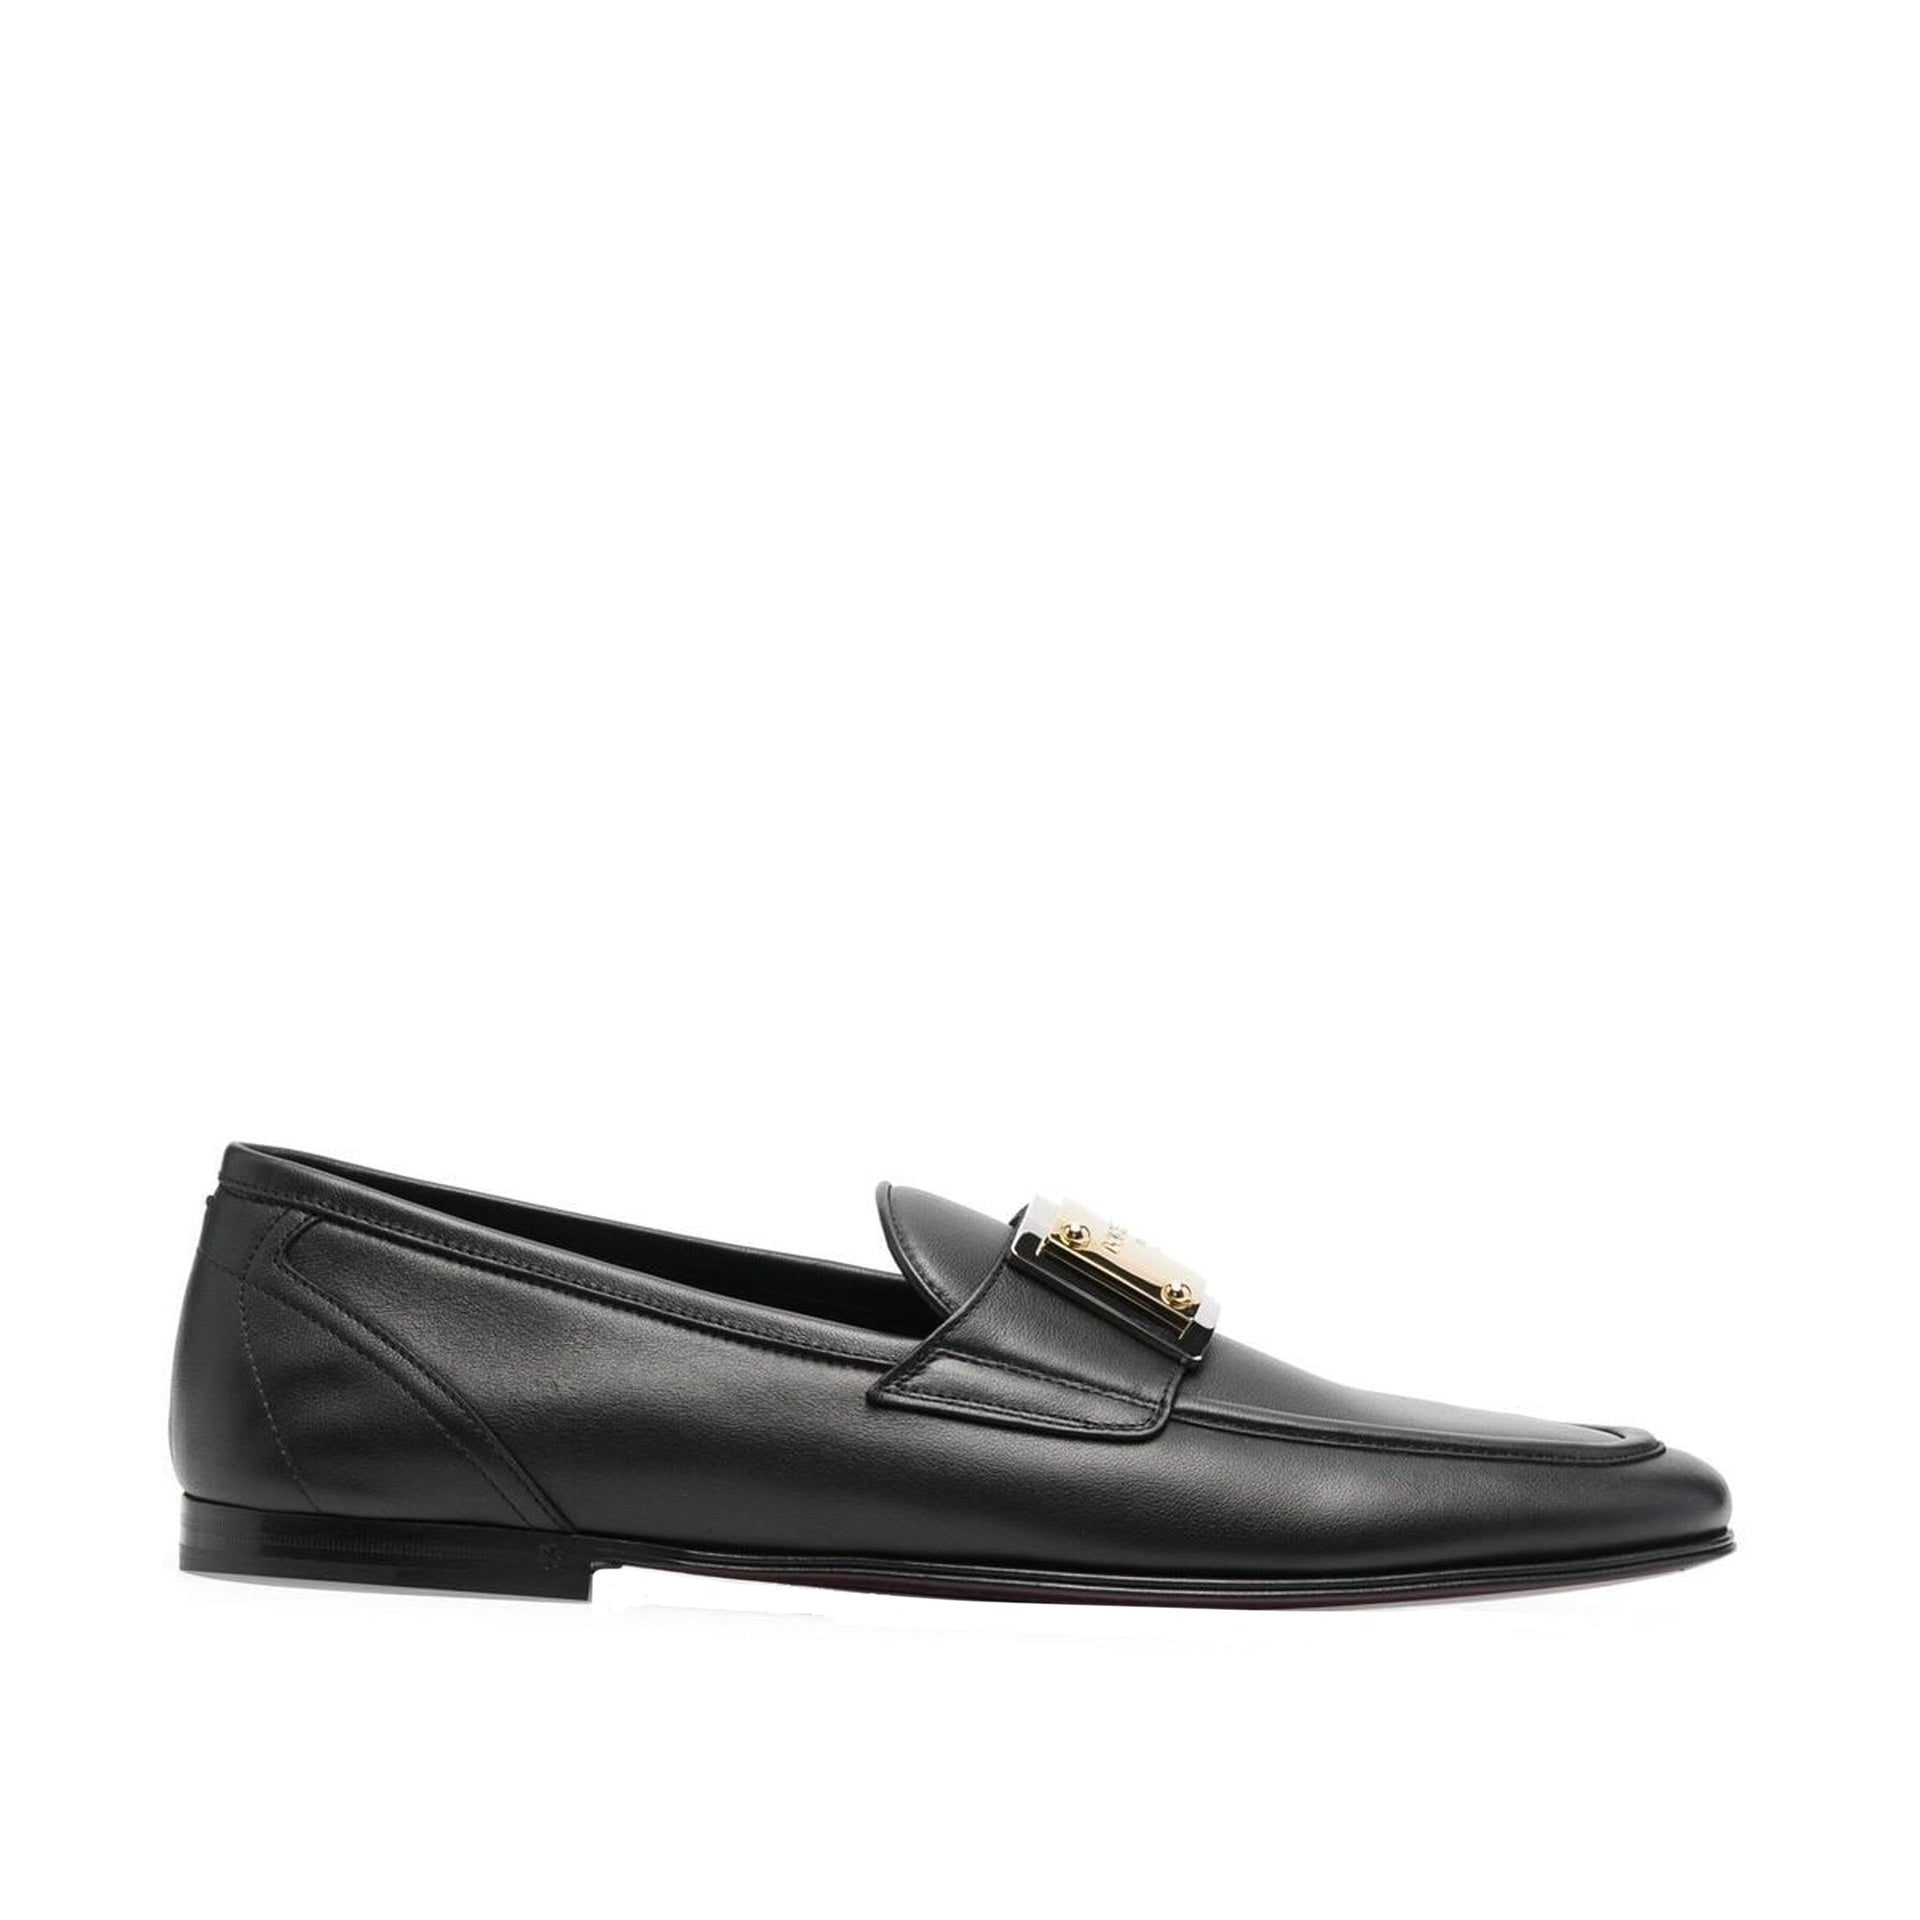 DOLCE-GABBANA-OUTLET-SALE-Dolce-Gabbana-Leather-Logo-Loafers-Flache-Schuhe-BLACK-39_5-ARCHIVE-COLLECTION.jpg